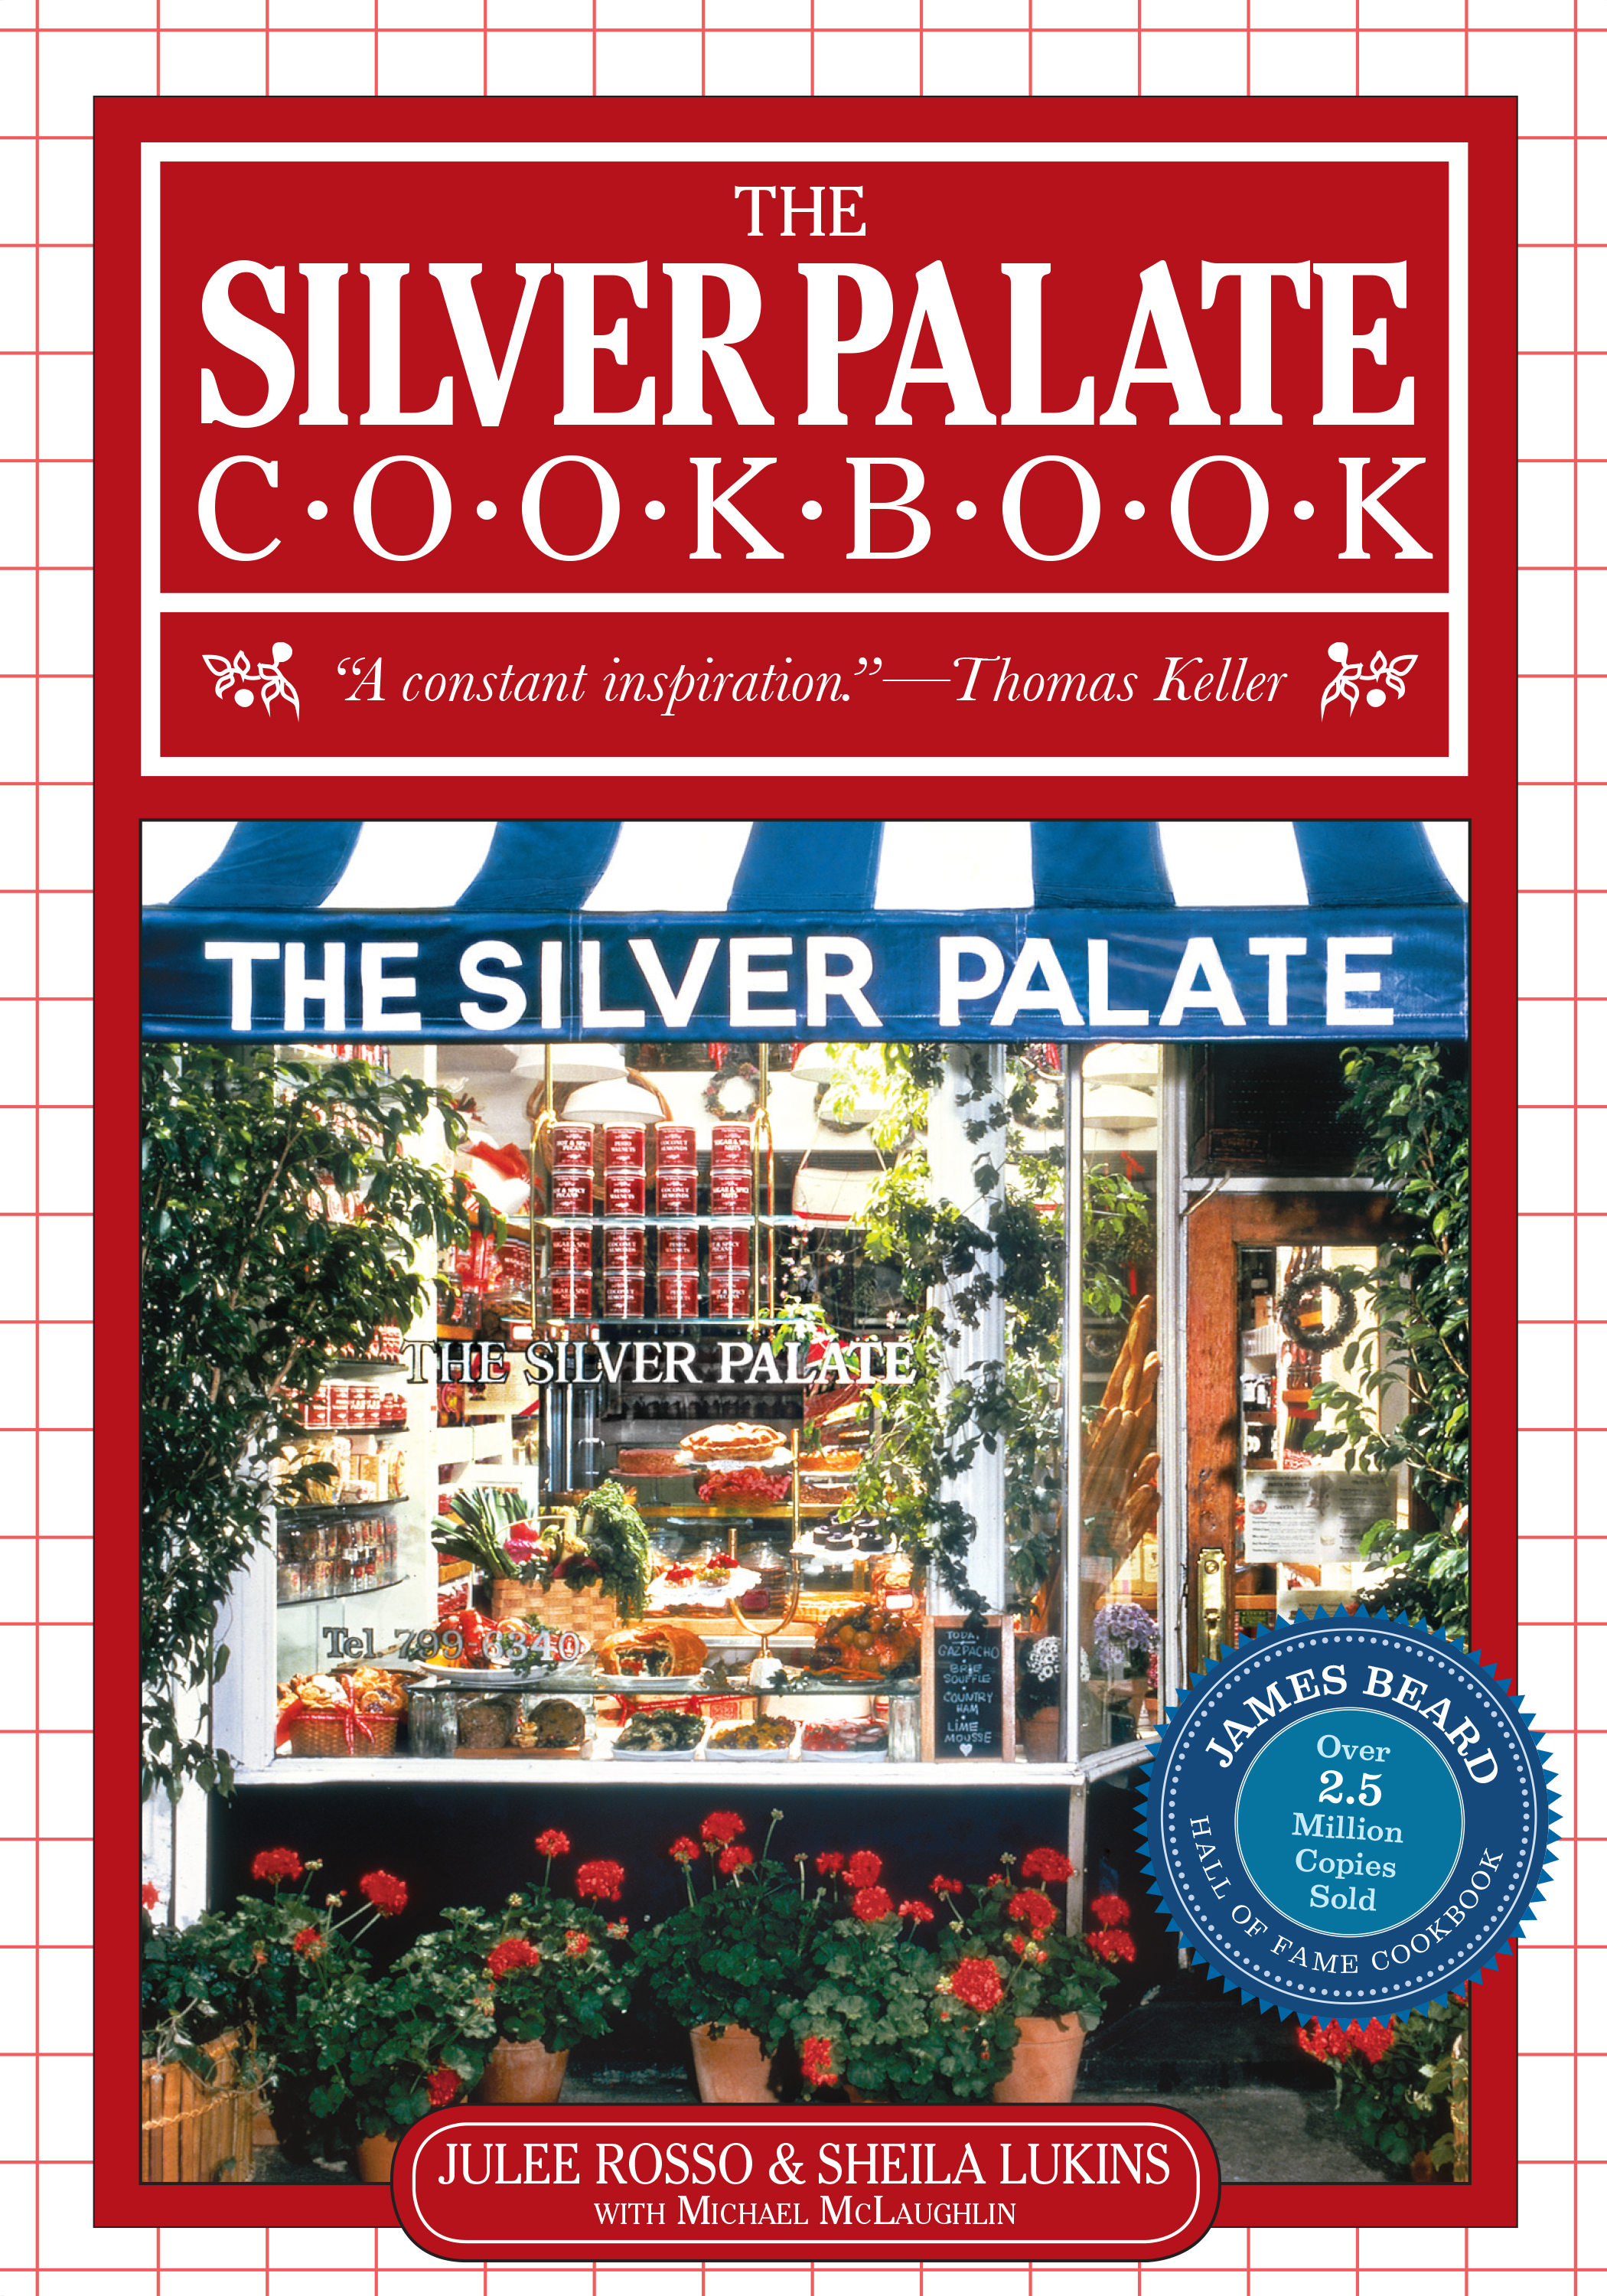 The Silver Palate Cookbook - 10-14.99